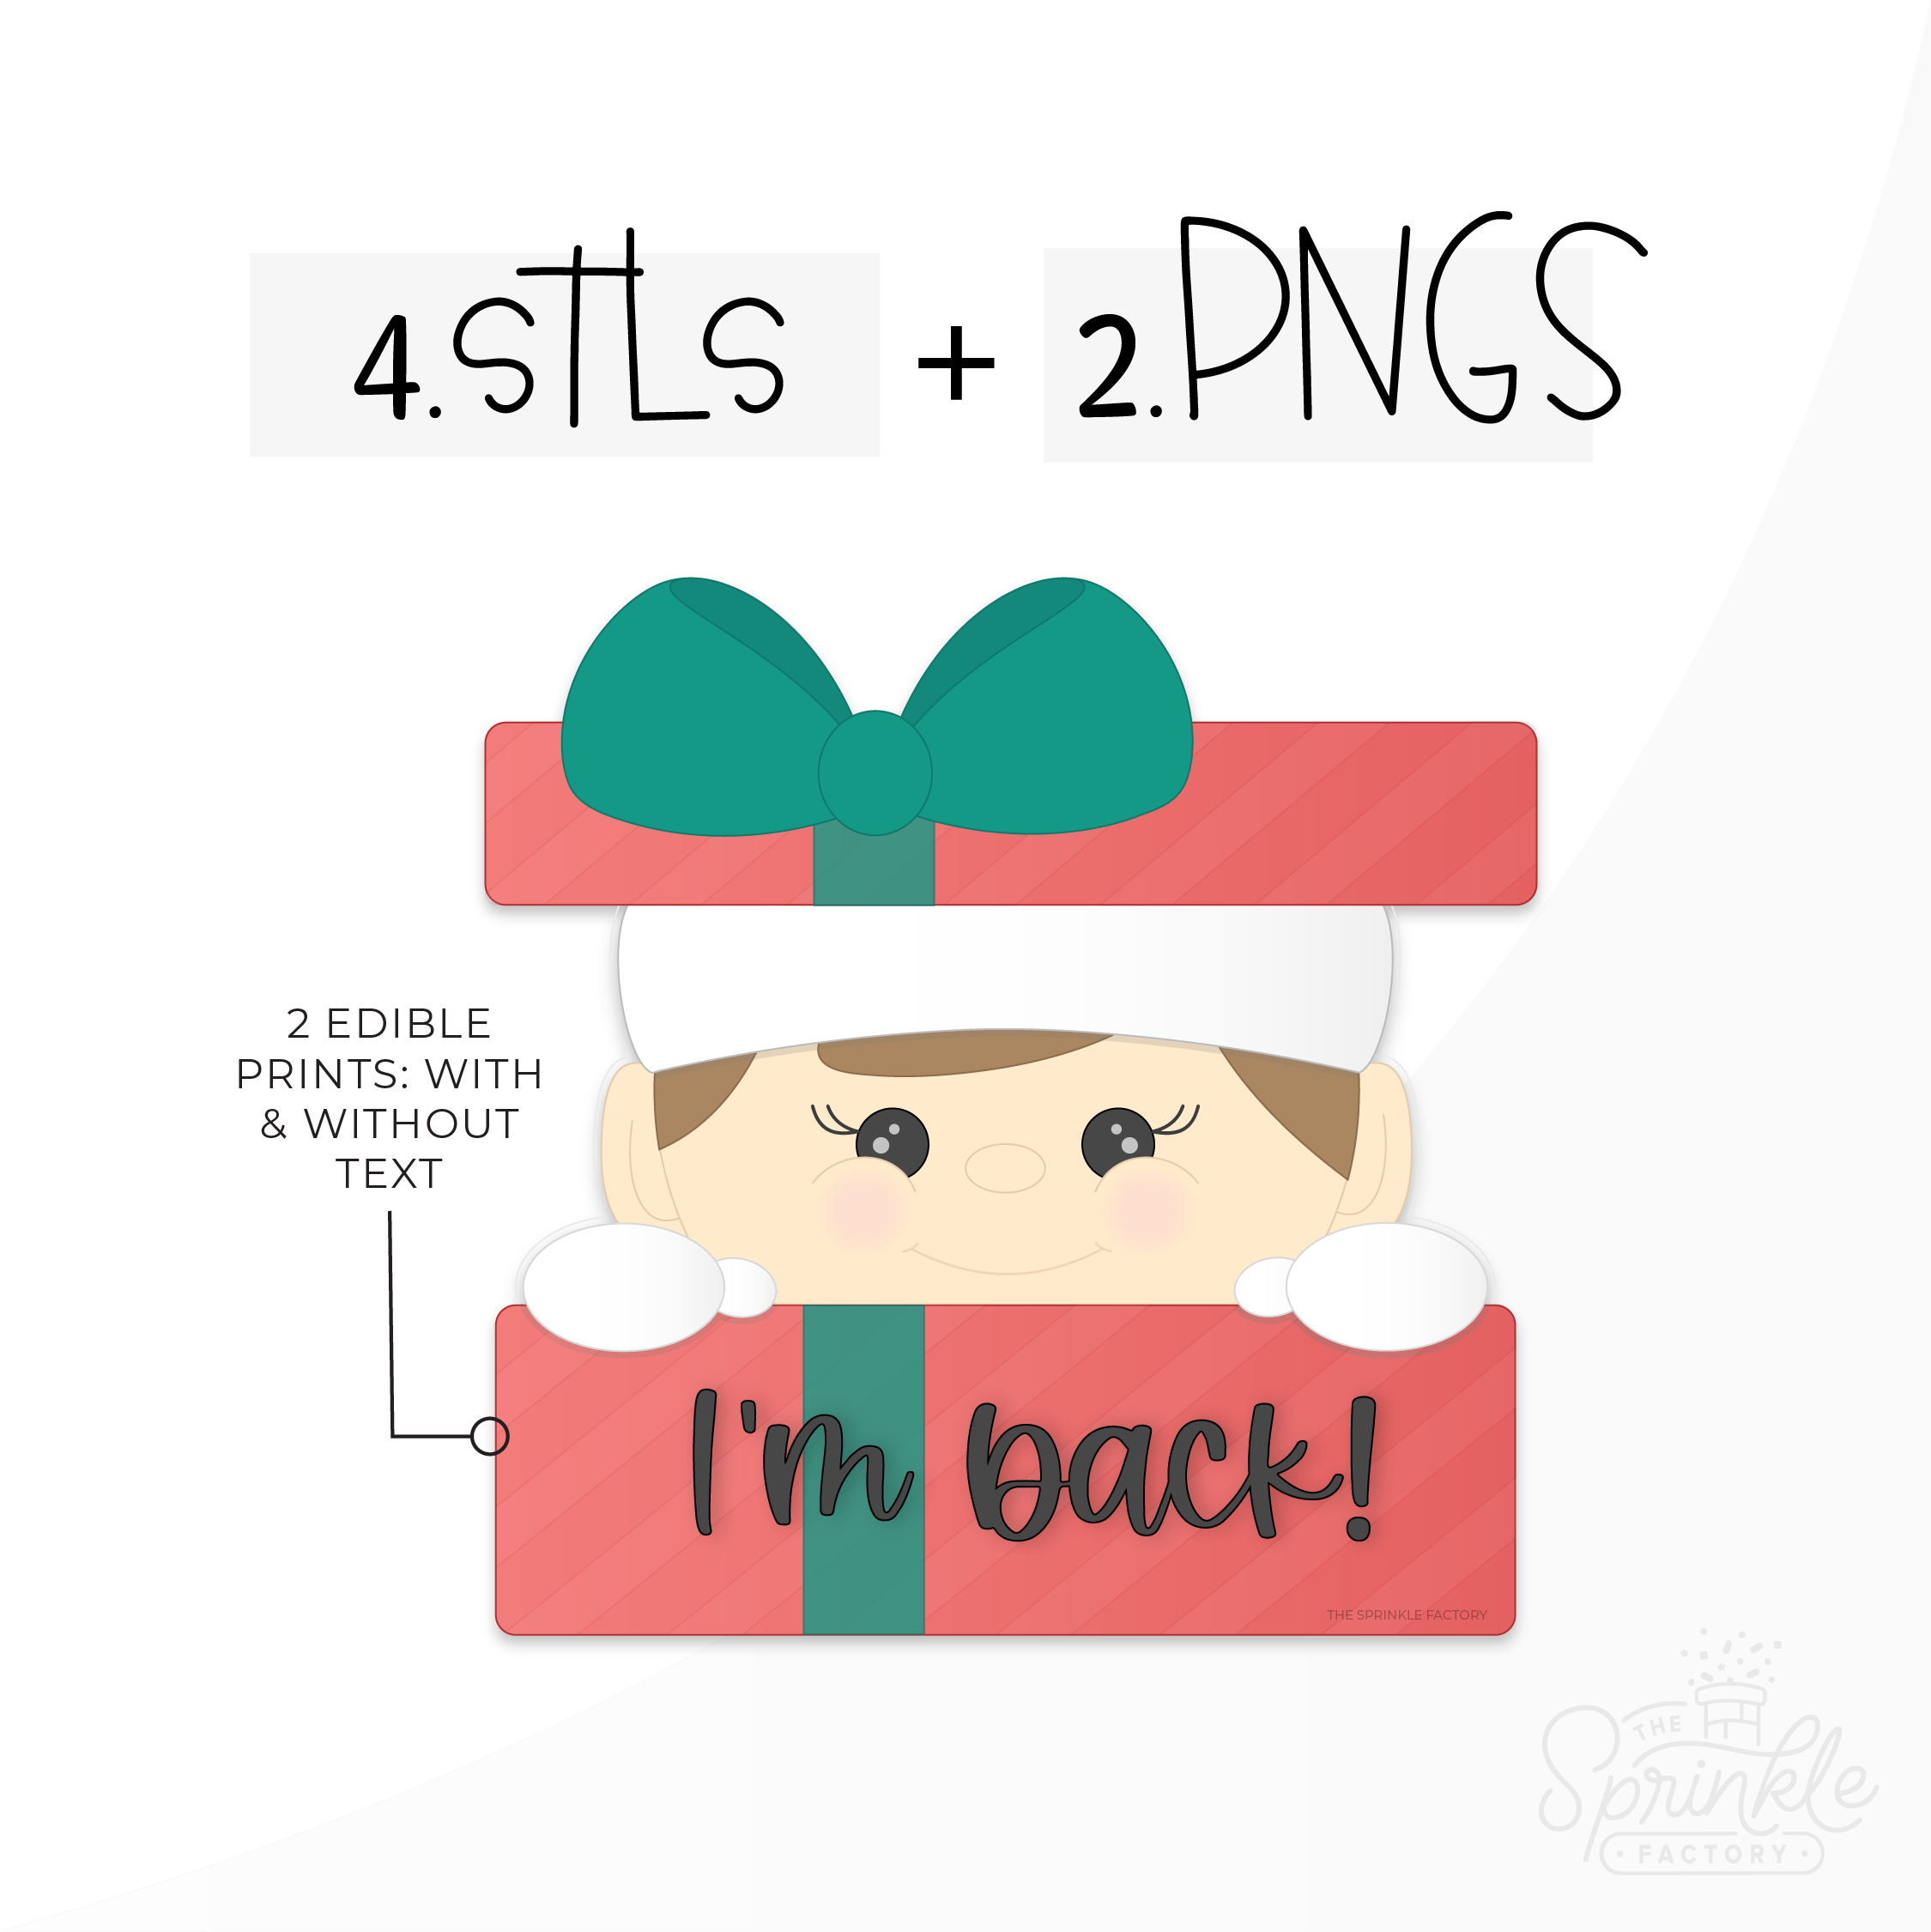 Clipart of an elf peaking out of a red present with a green ribbon with the box top on his head with a green bow.